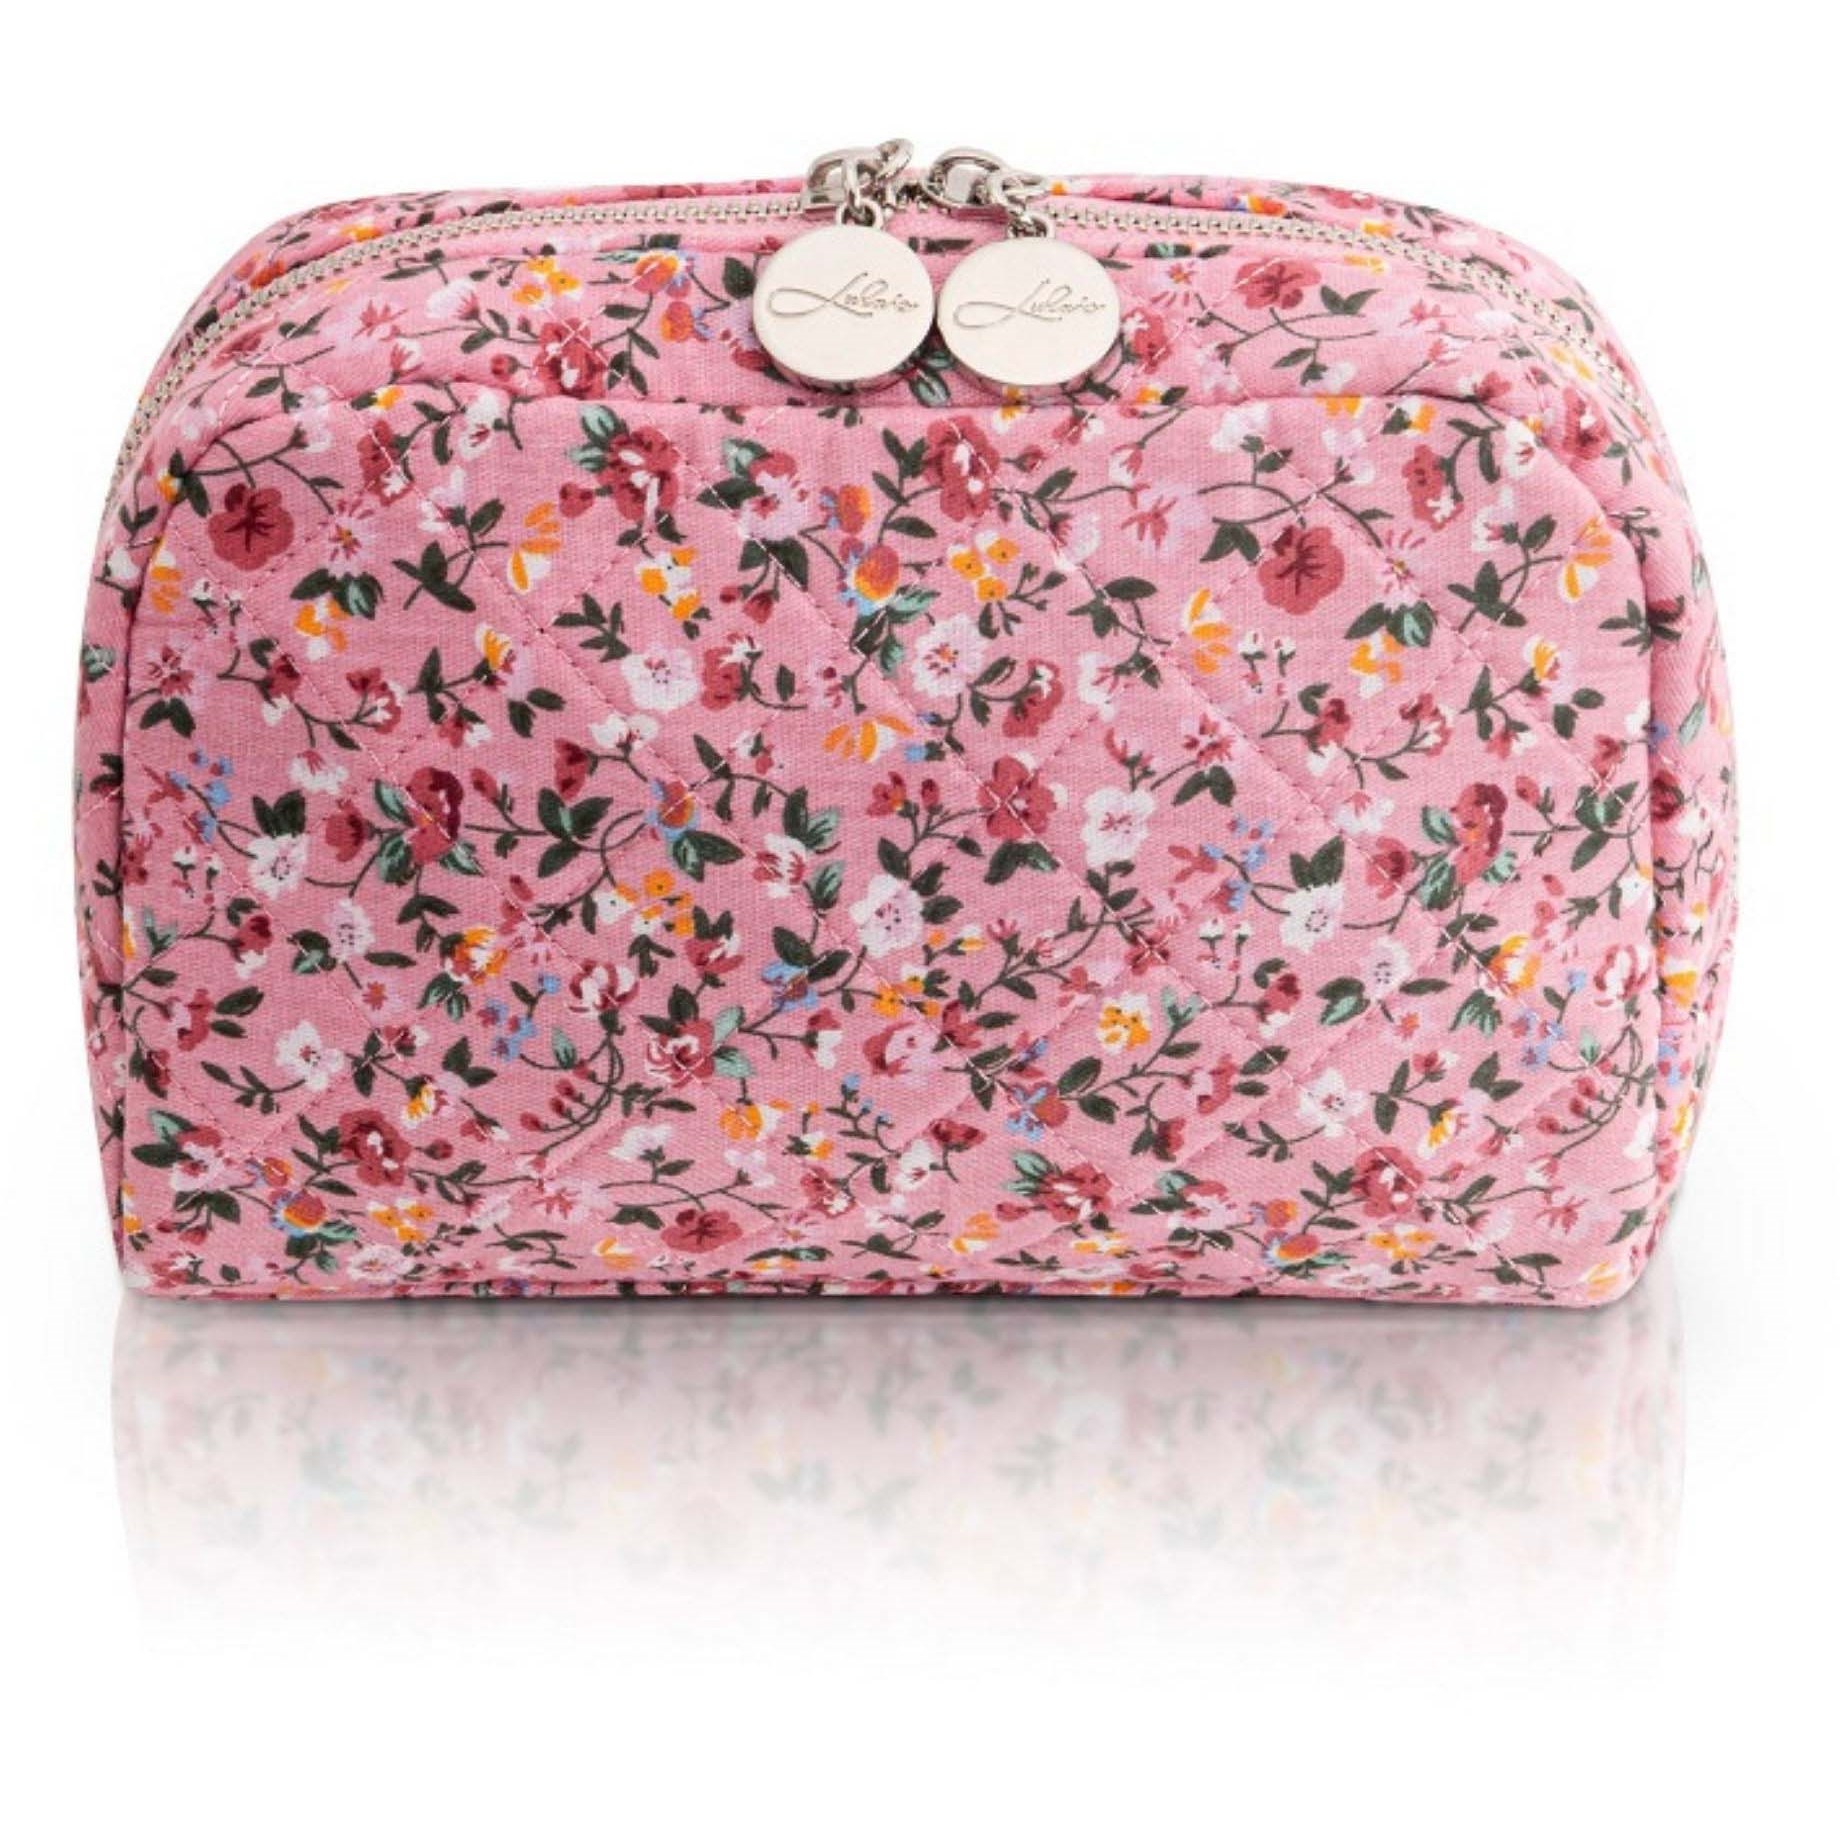 LULUS ACCESSORIES Cosmetic Bag Floral Rose